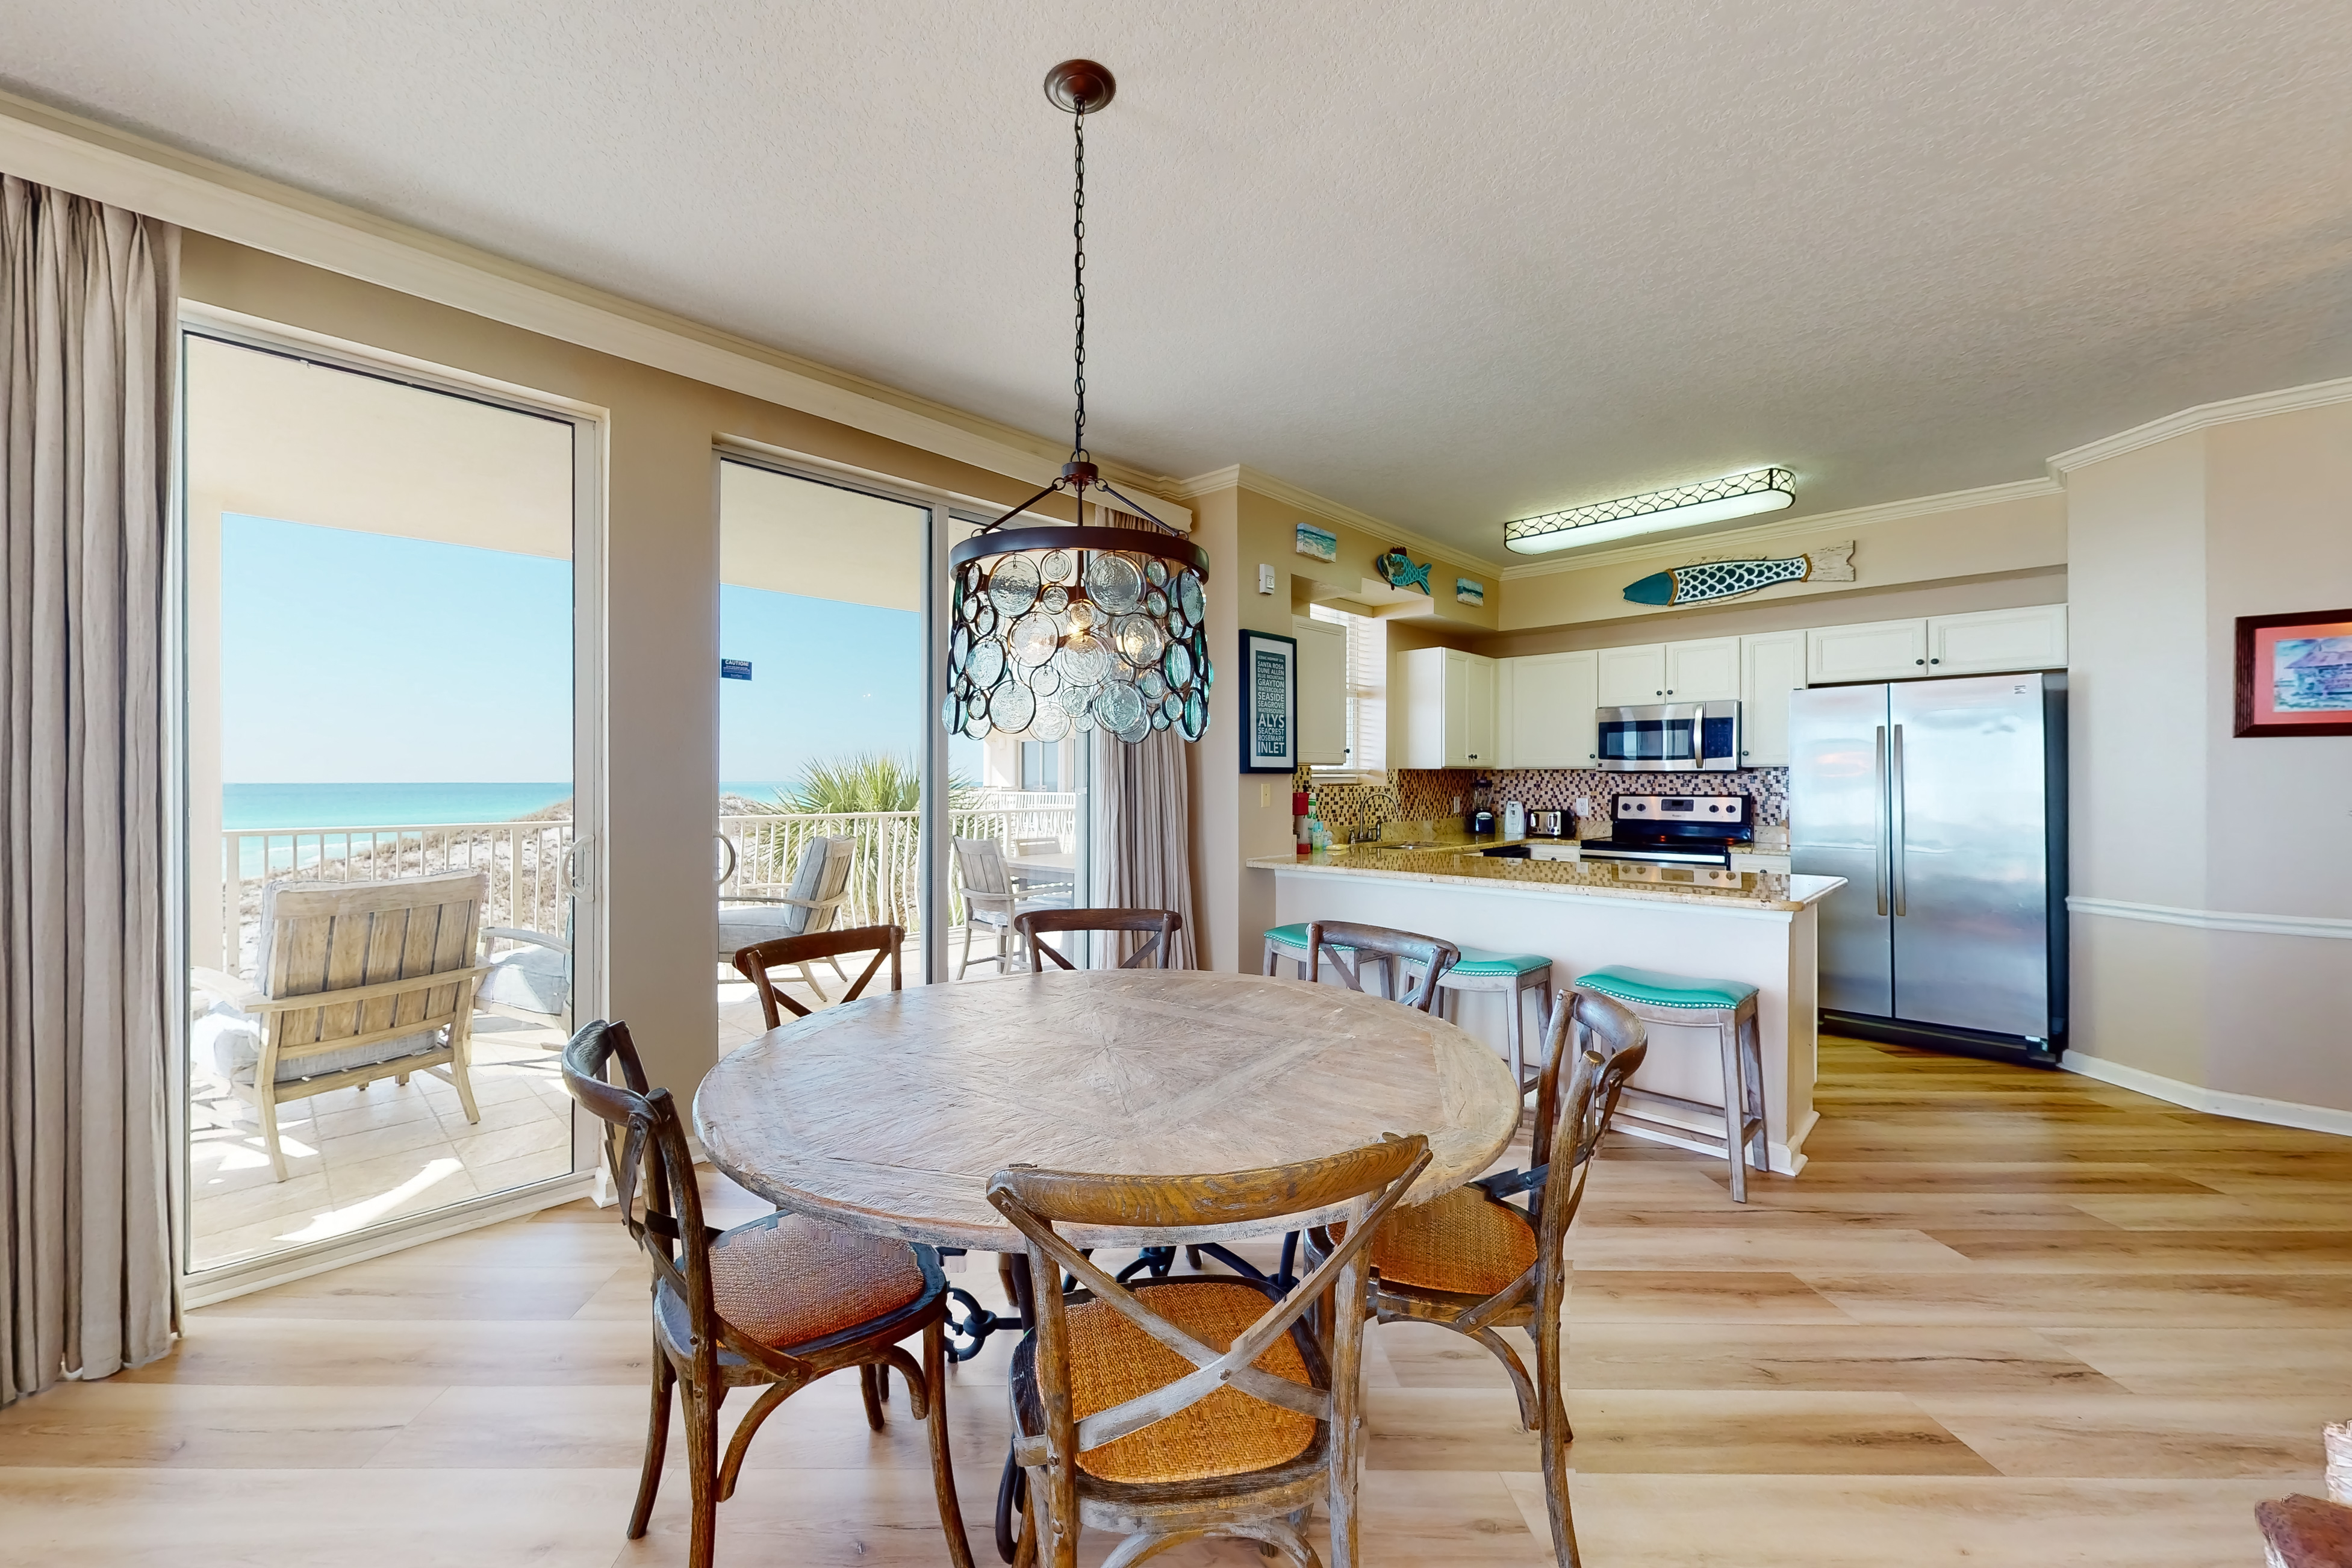 Dunes of Seagrove A209 Condo rental in Dunes of Seagrove in Highway 30-A Florida - #6